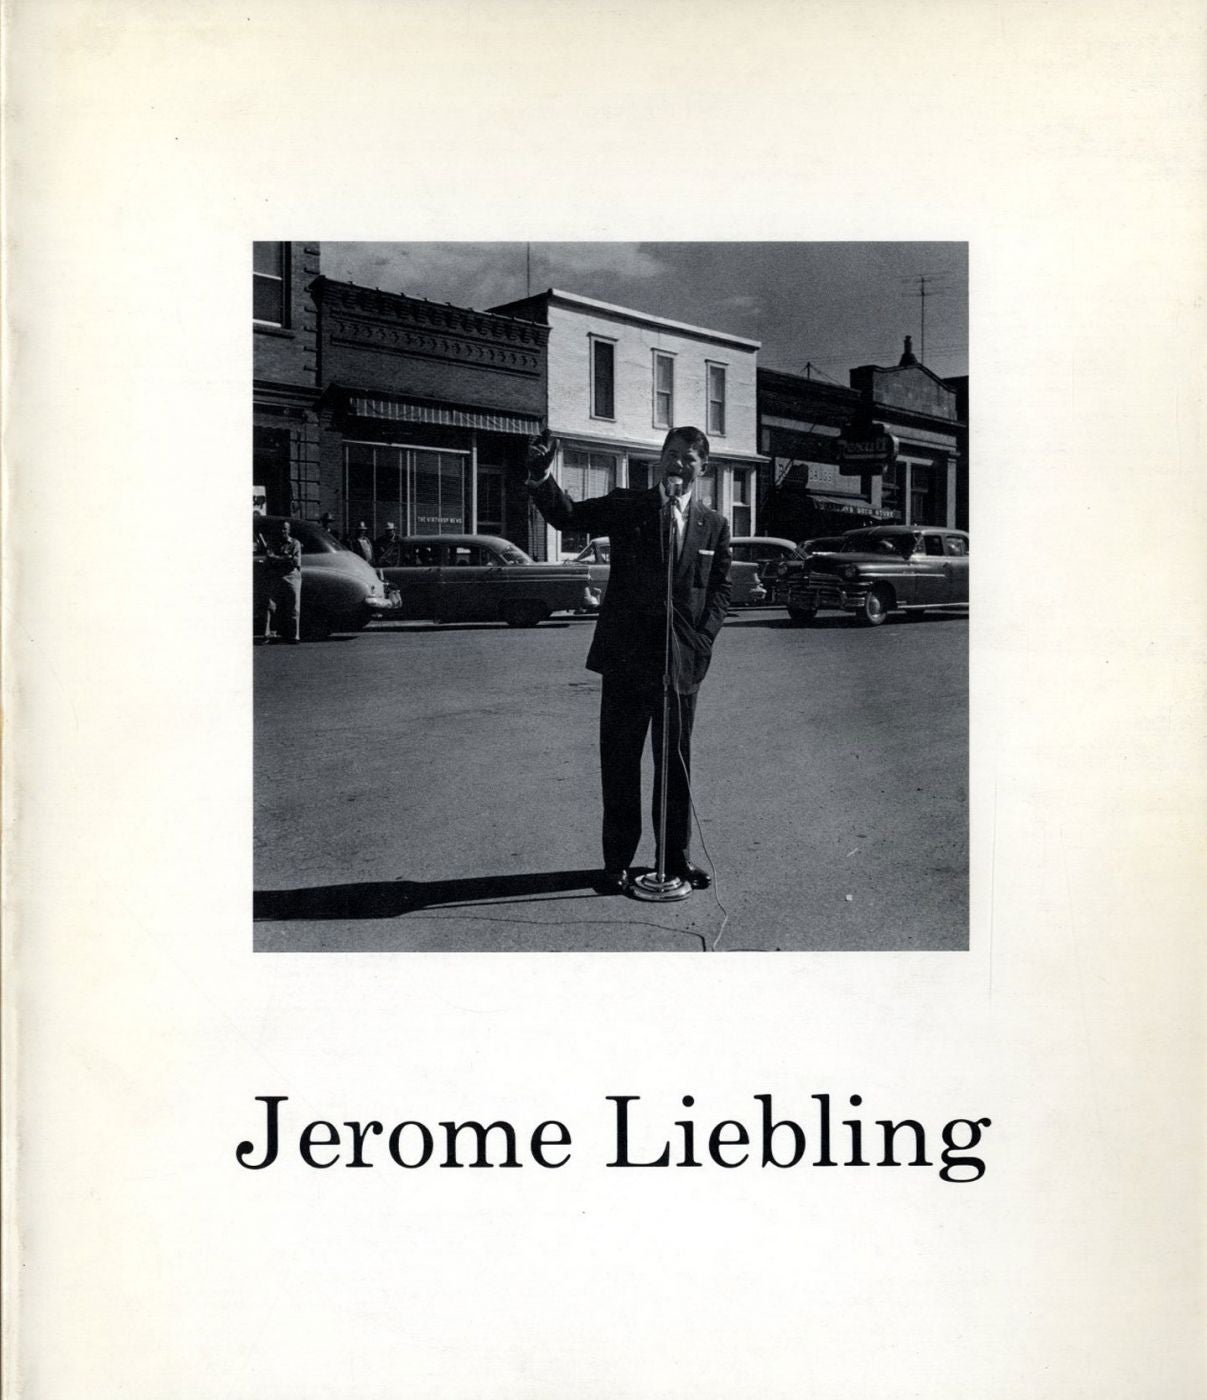 Untitled 15 (The Friends of Photography): Jerome Liebling: Photographs 1947-1977